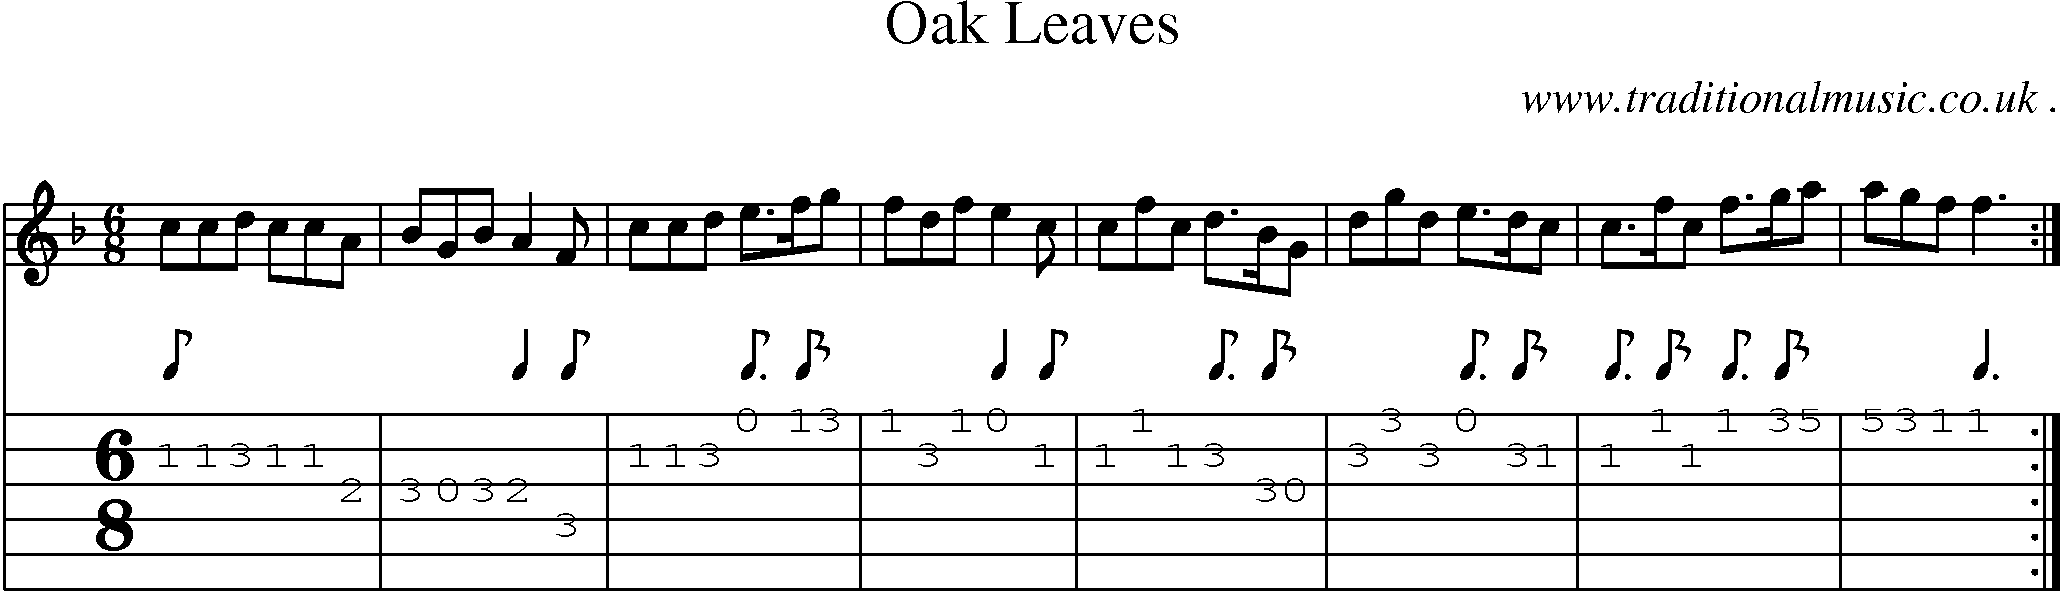 Sheet-Music and Guitar Tabs for Oak Leaves